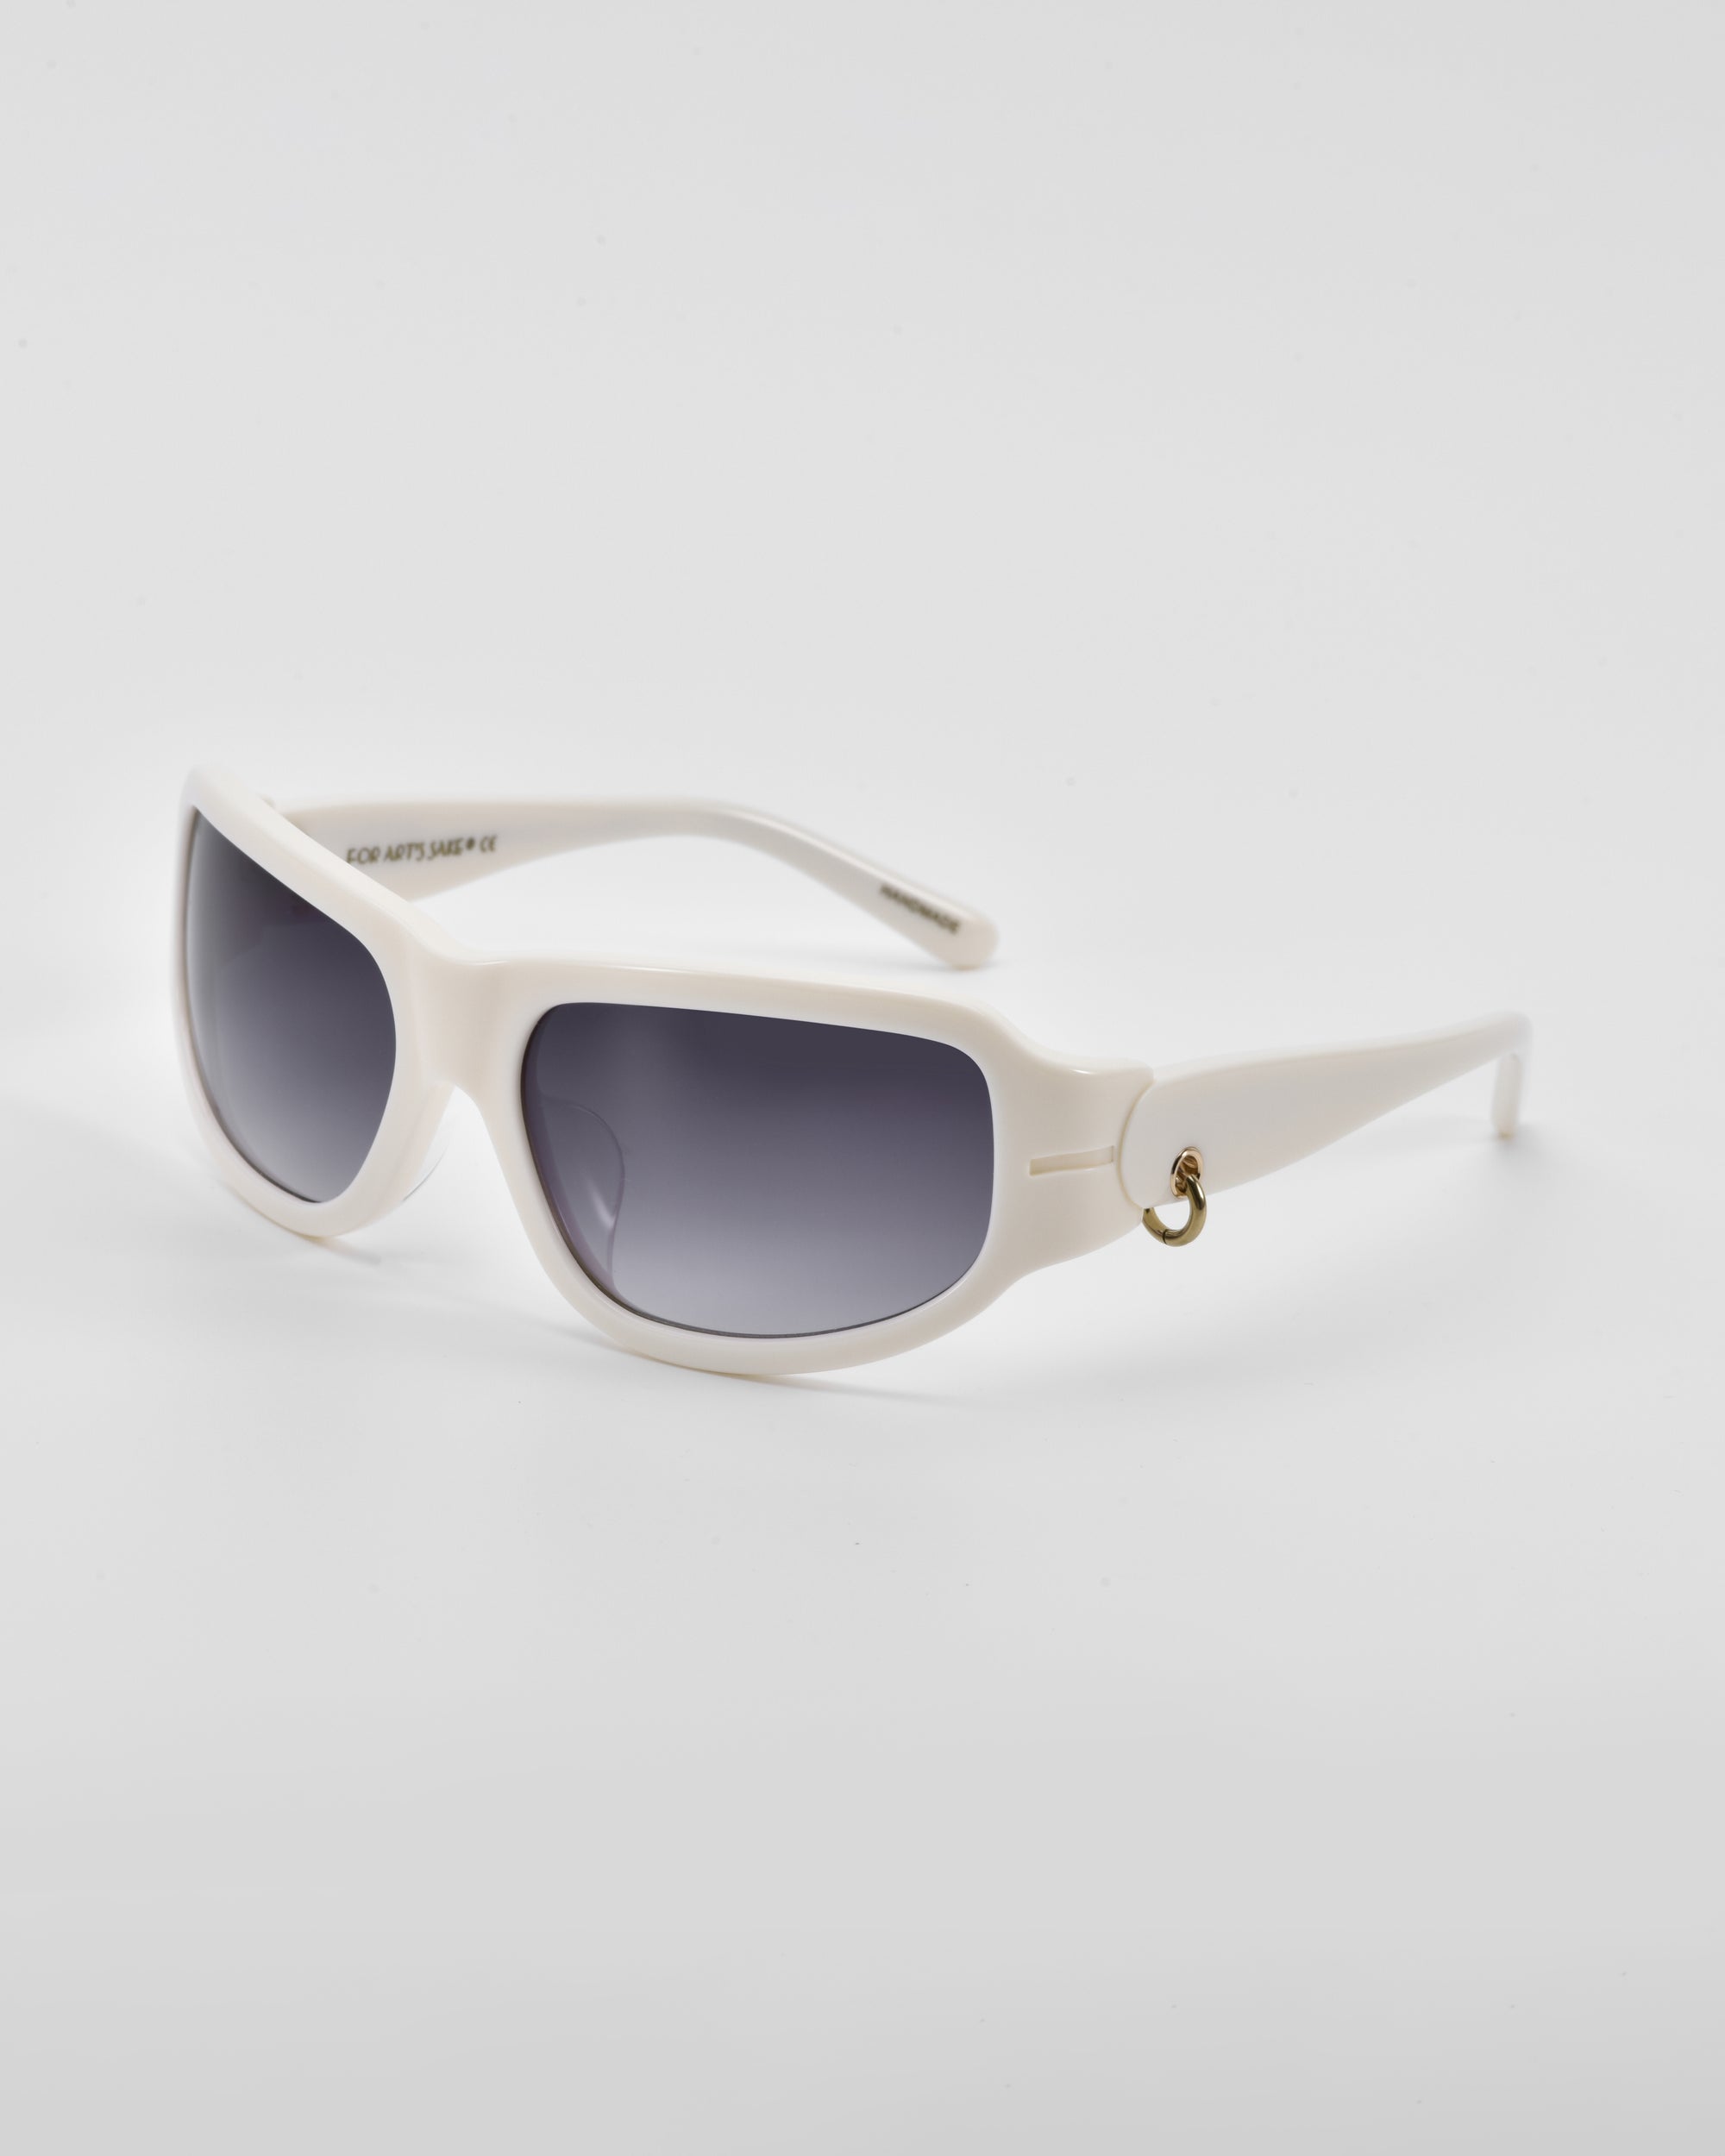 A pair of **Raven** wrap sunglasses with dark tinted lenses. The white frames have a sleek, modern design and feature a small 18-karat gold ring detail on the temples. The **For Art&#39;s Sake®** sunglasses are set against a plain white background.